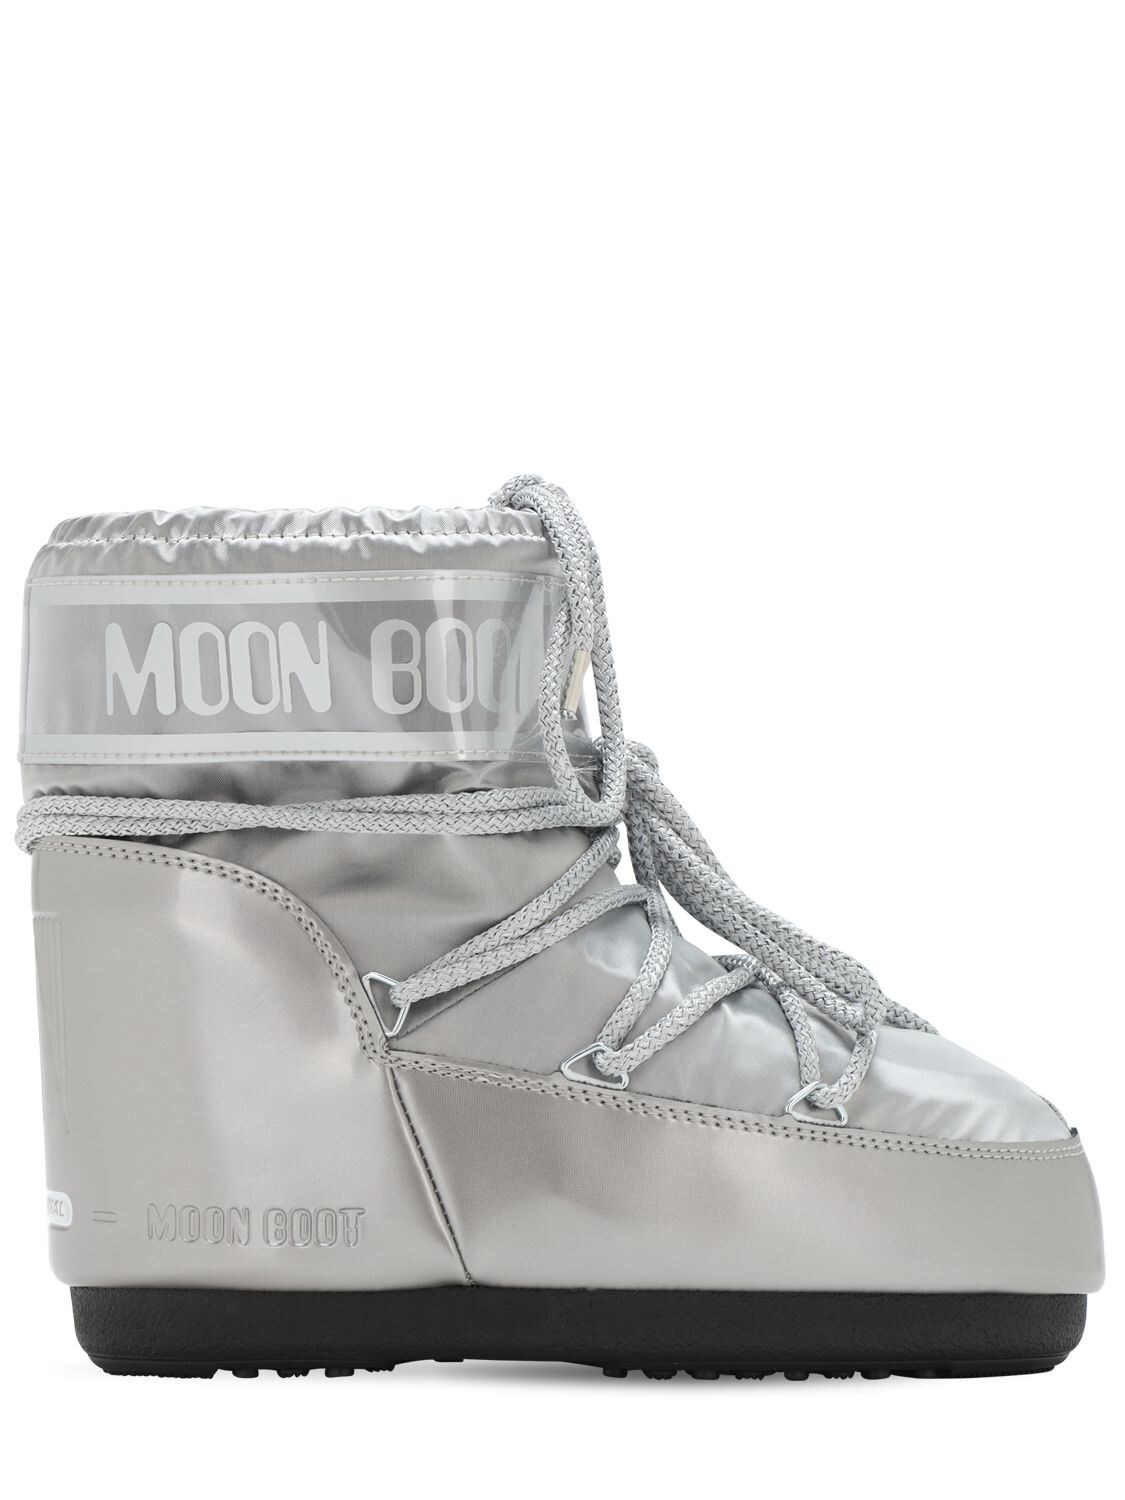 Moon Boot Glance Waterproof Low Snow Boots In Silver